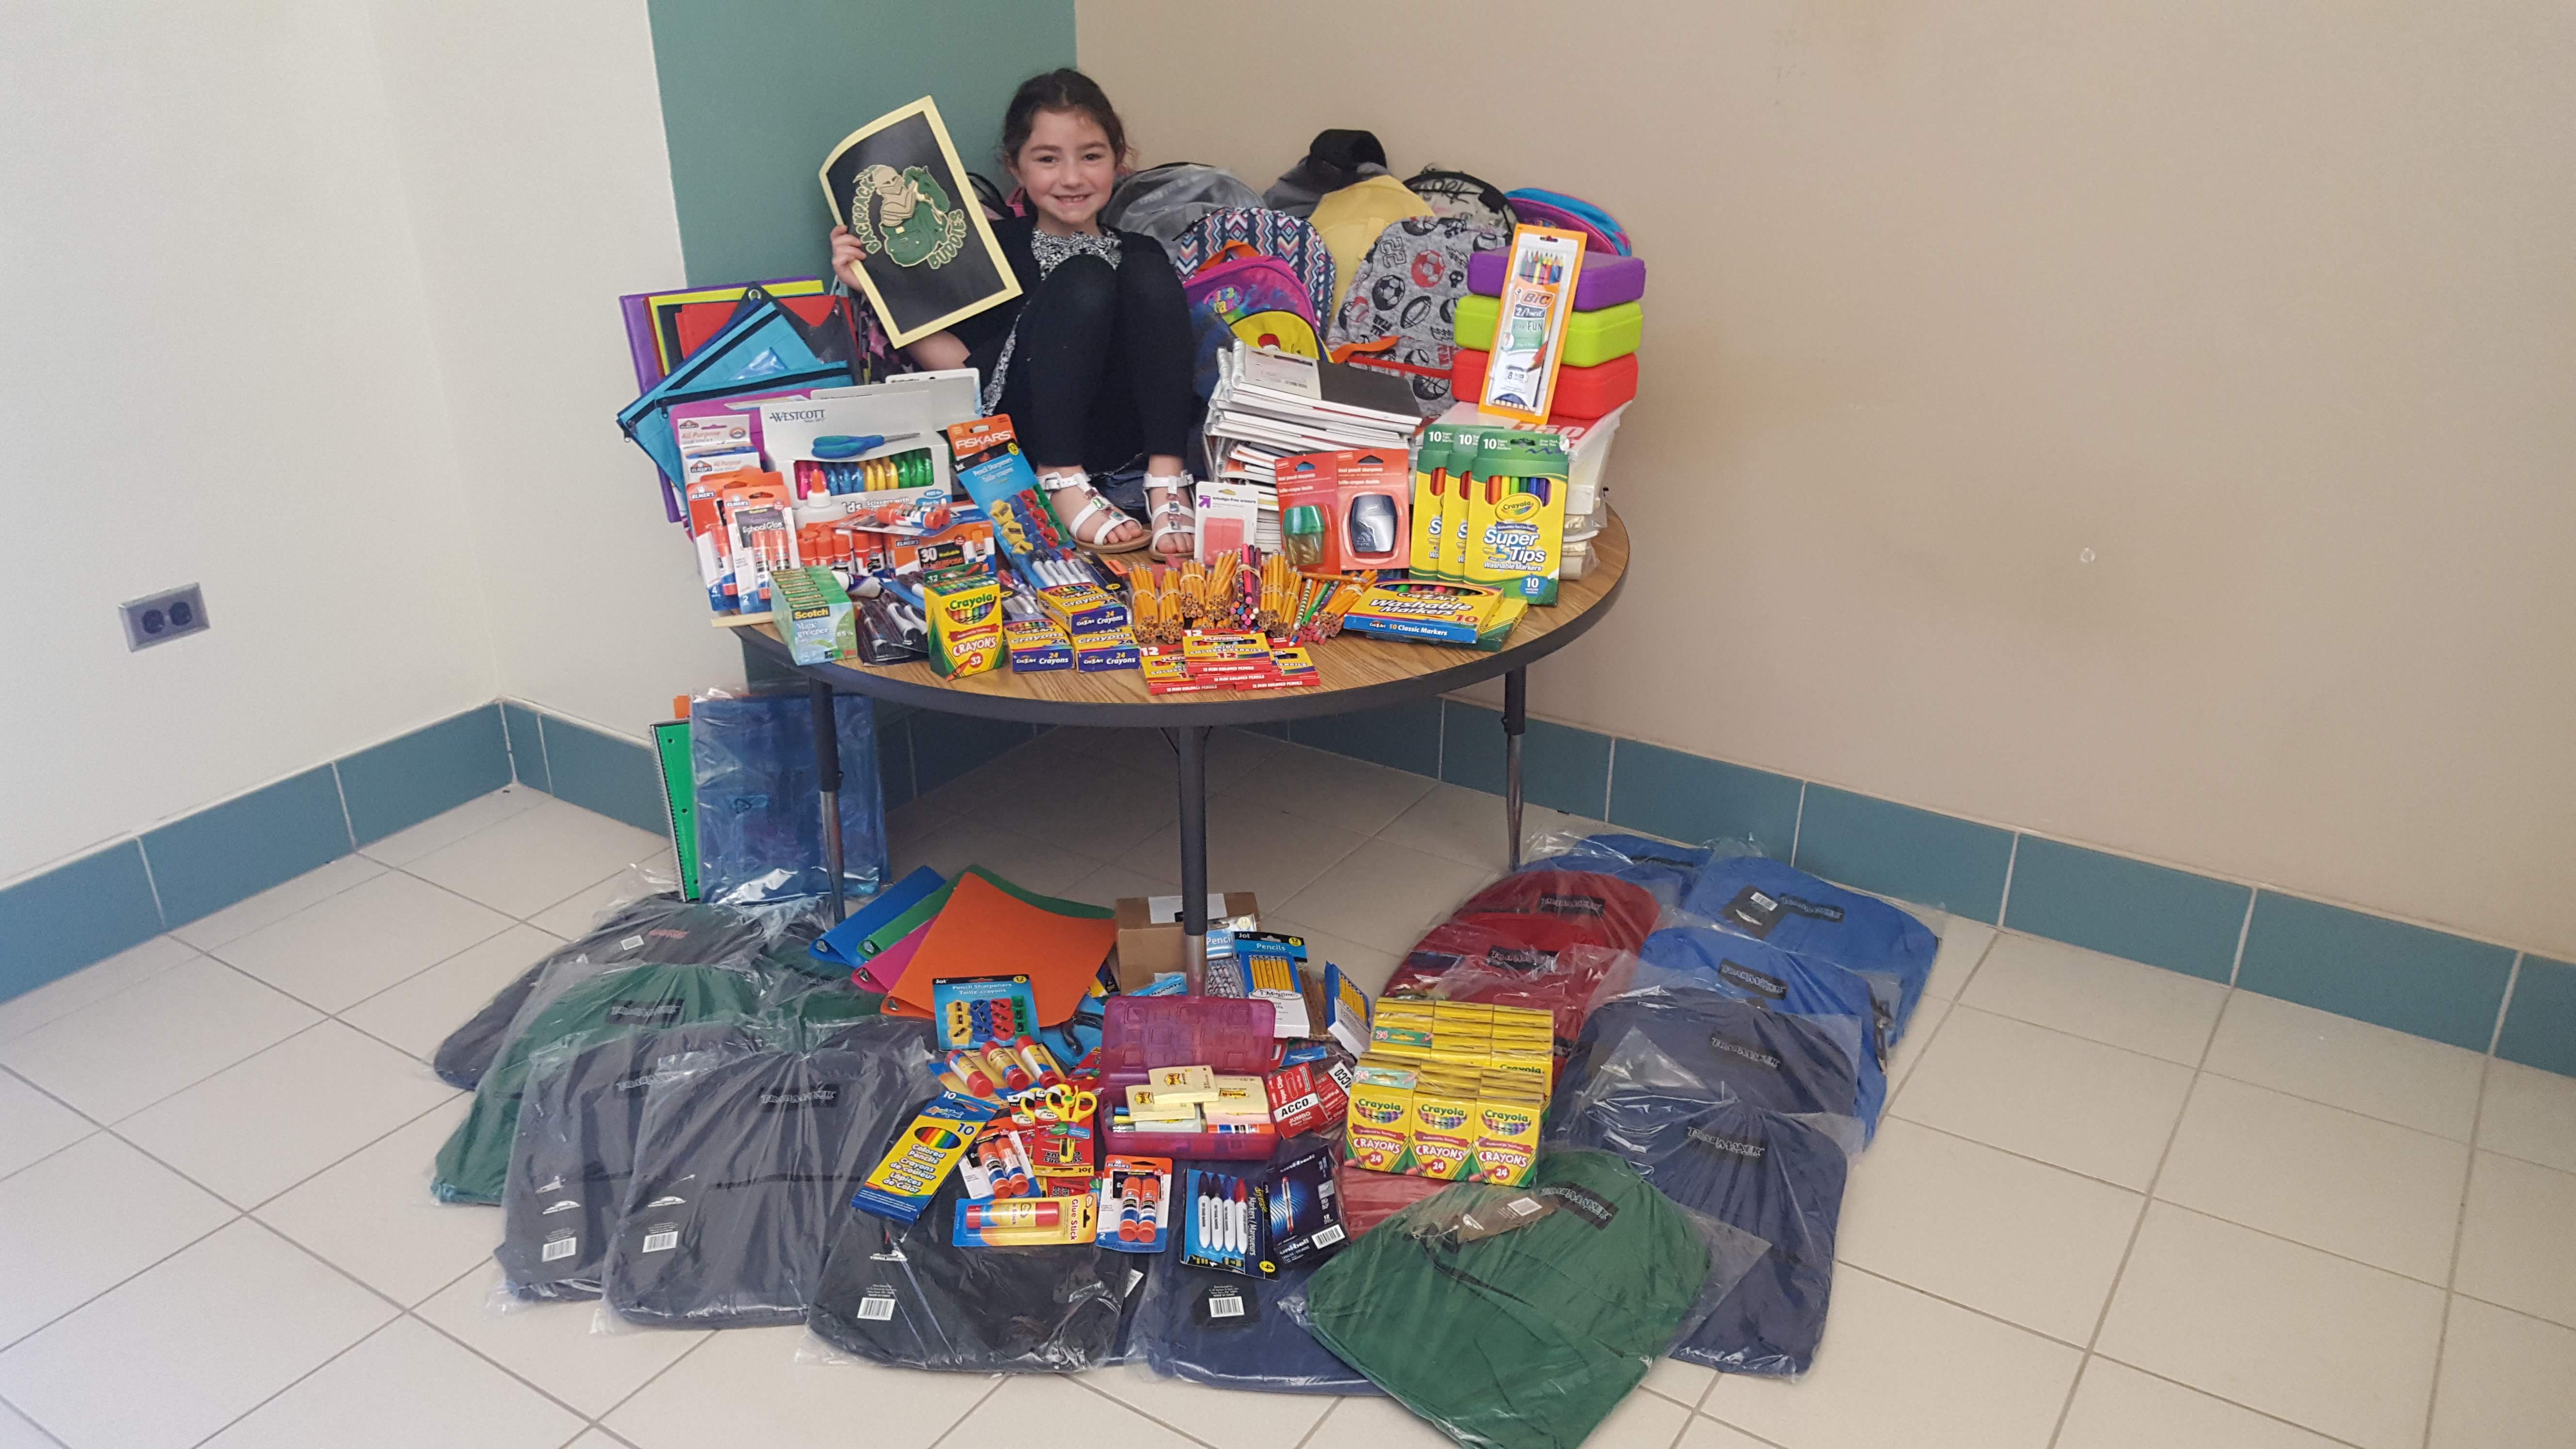 Rylee sits among donated supplies